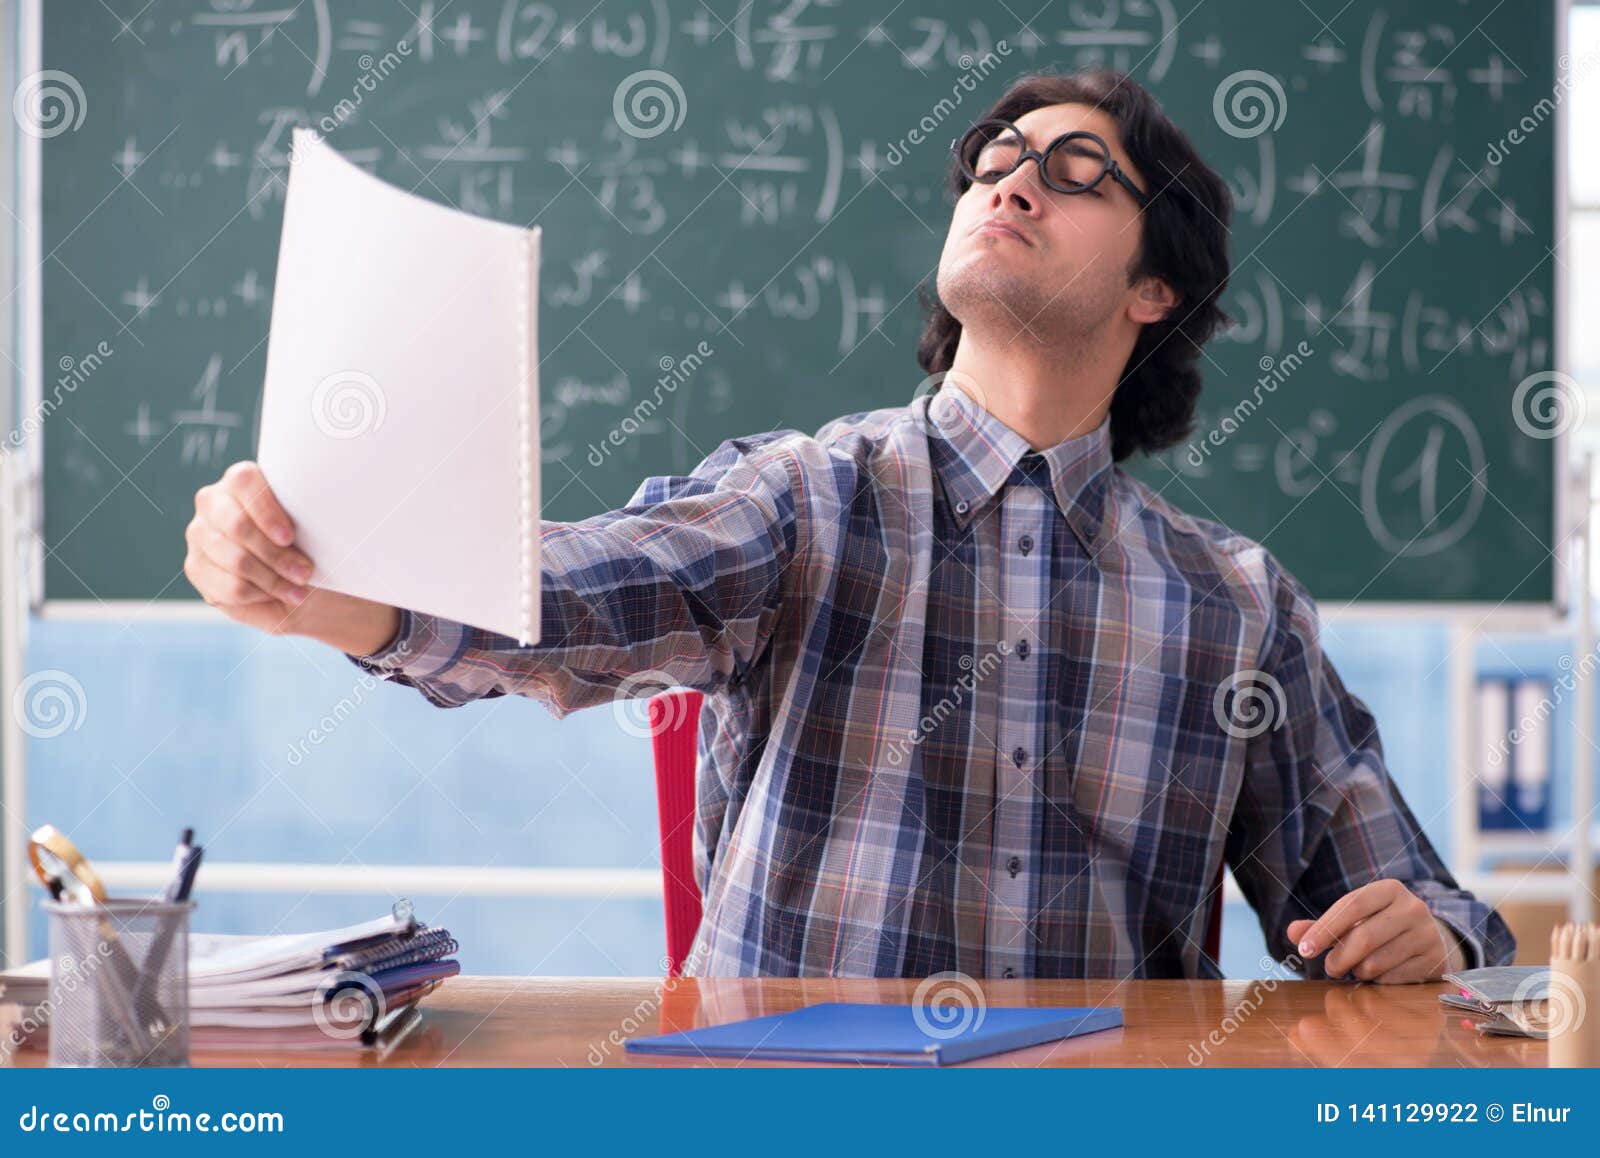 The Young Funny Math Teacher In Front Of Chalkboard Stock Photo 141129922 -  Megapixl